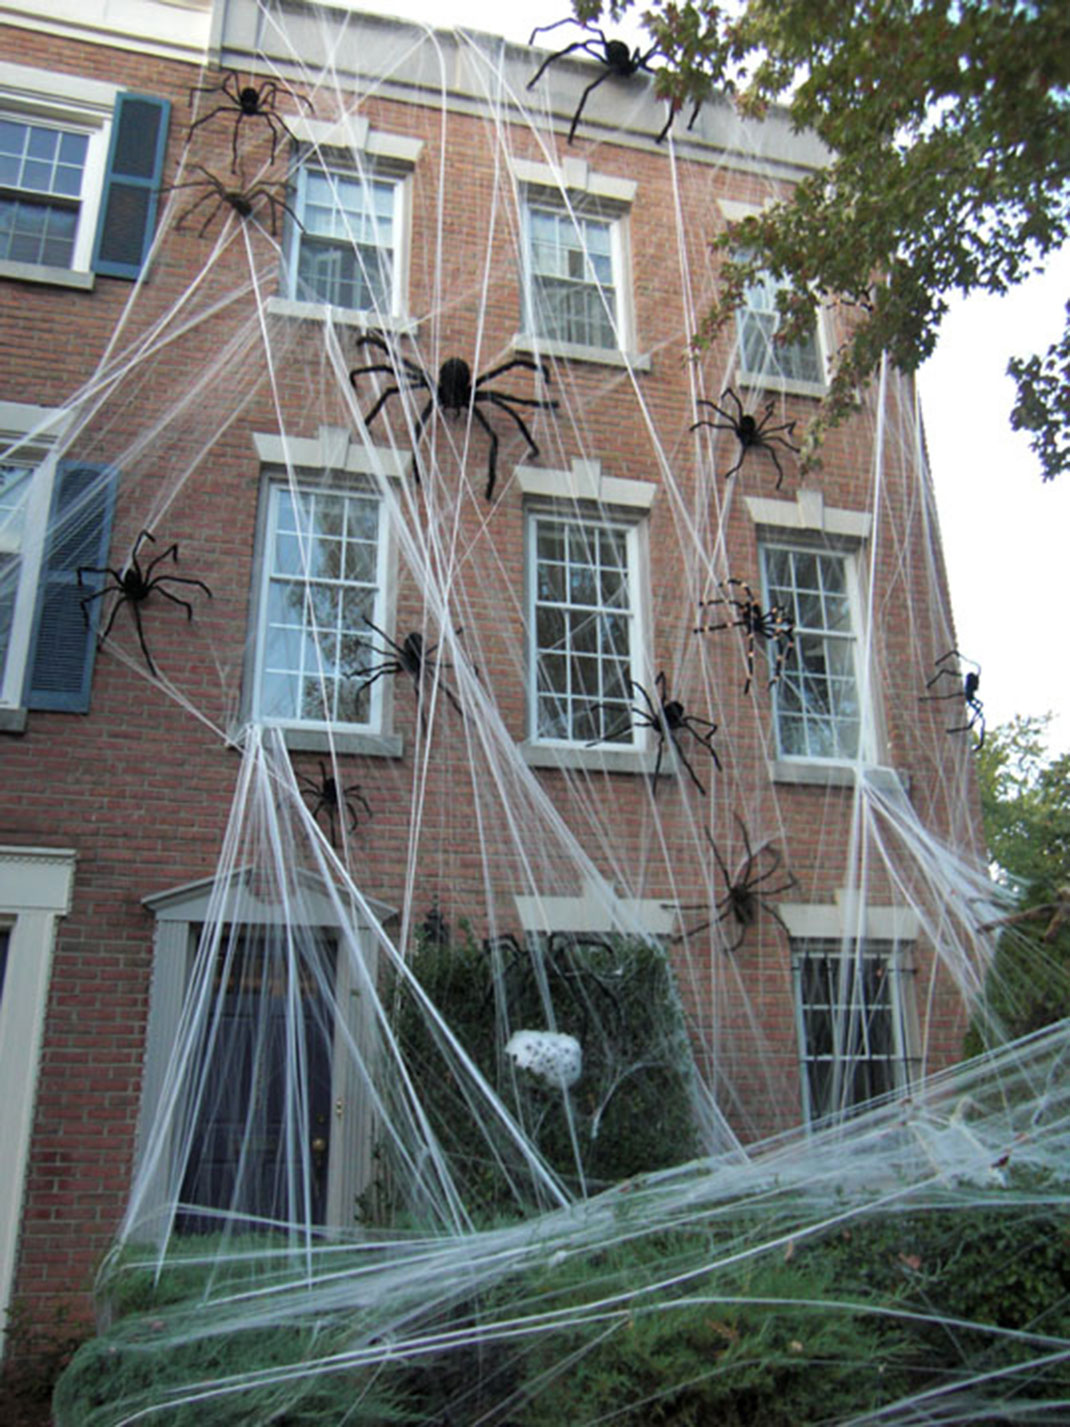 45 Halloween Decorations That Convert Homes Into Real Horror Meuseums